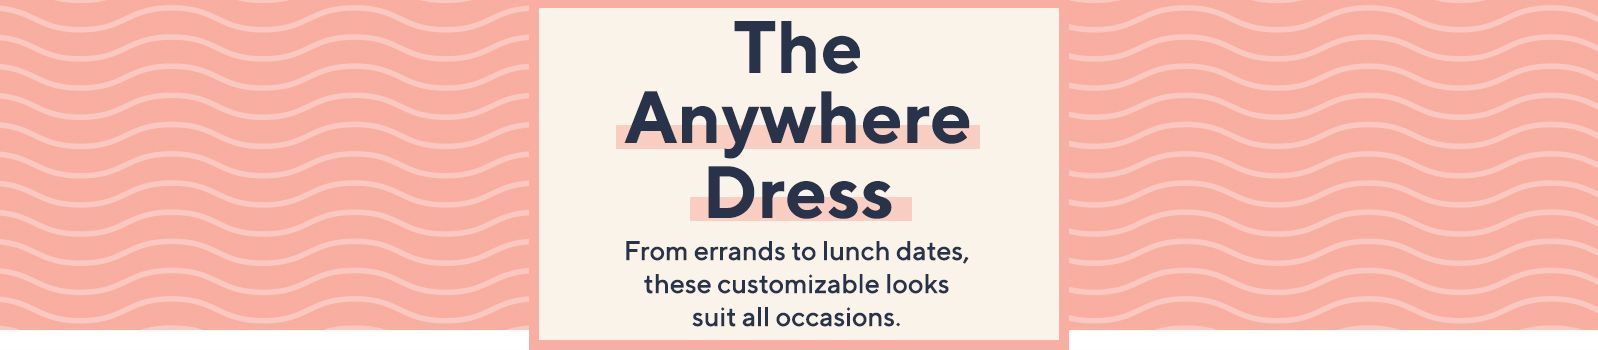 The Anywhere Dress.  From errands to lunch dates, these customizable looks suit all occasions.